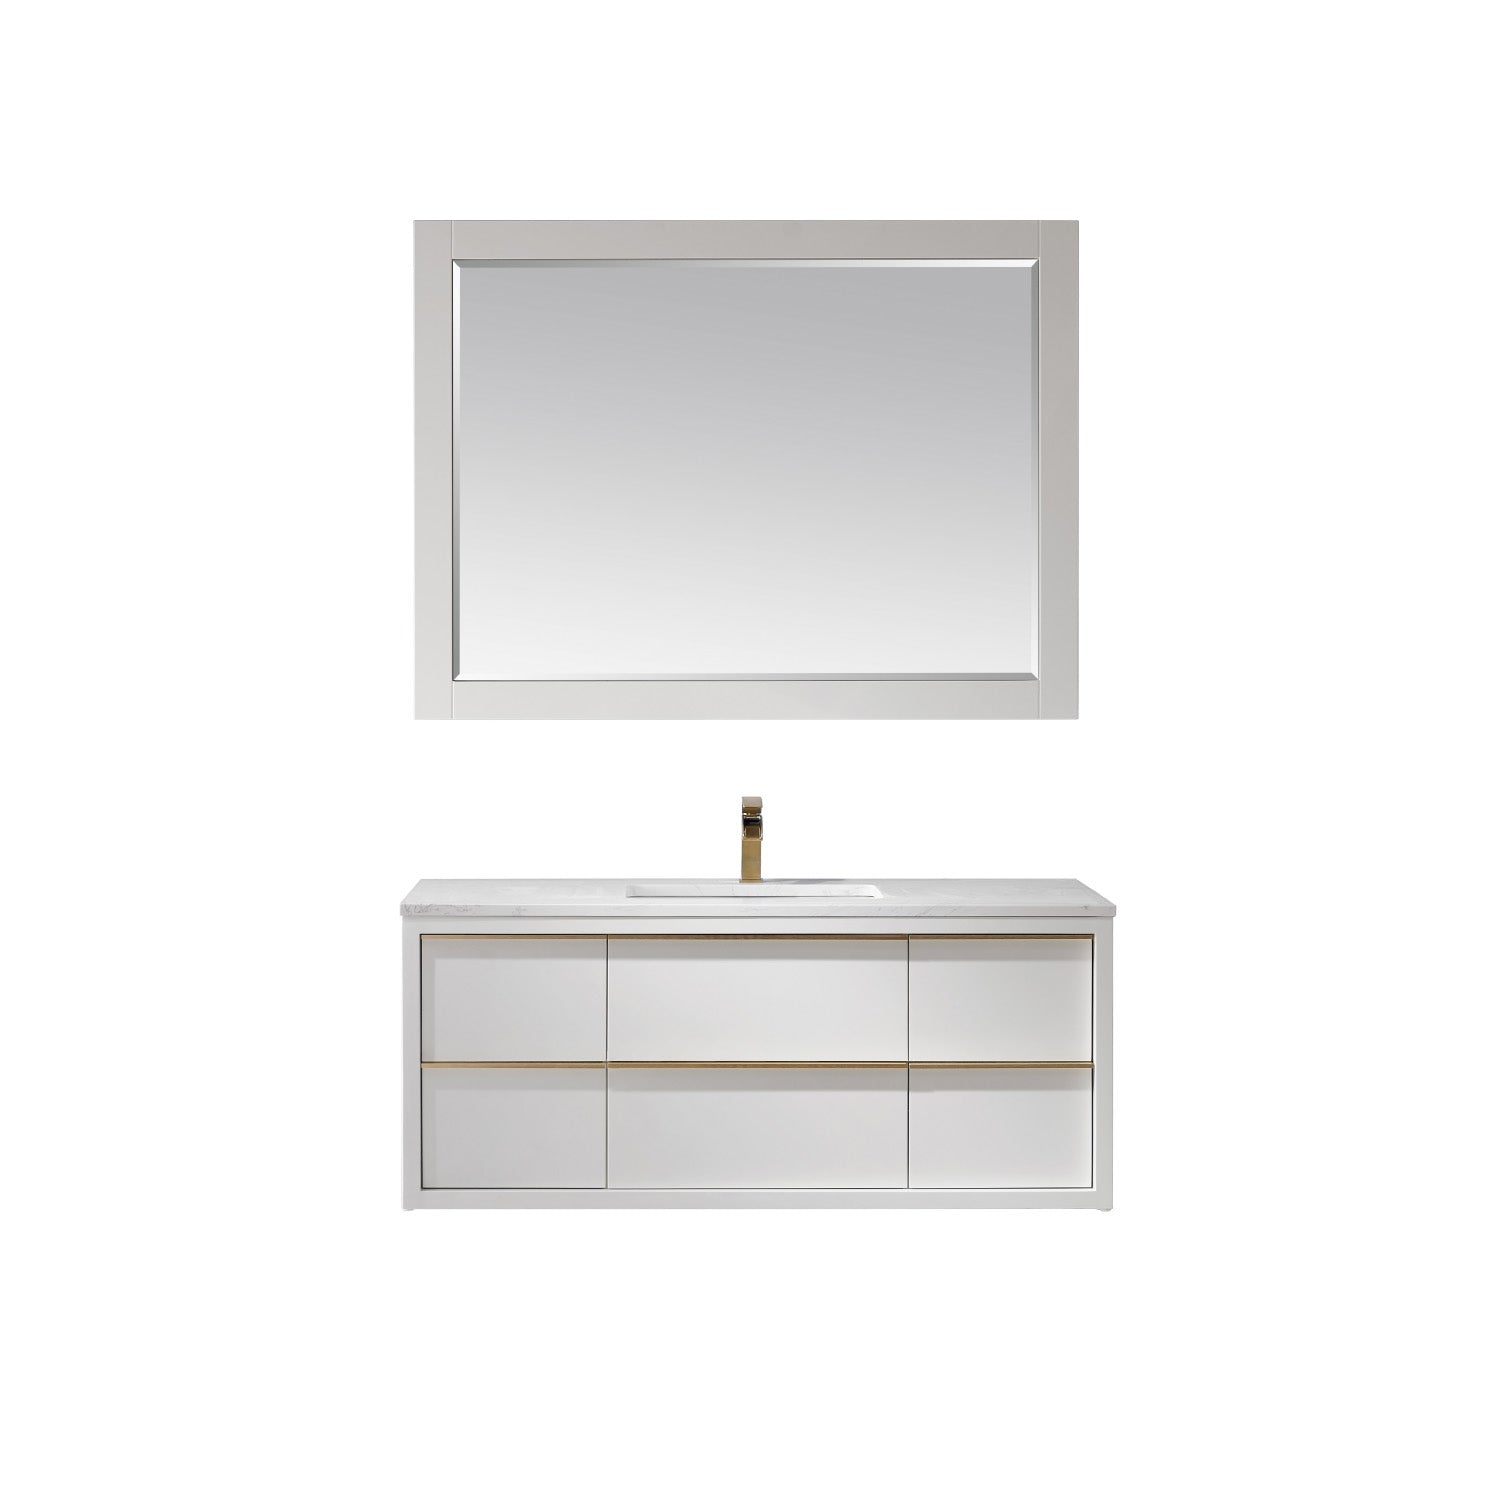 Altair Morgan 48" Single Bathroom Vanity Set in White and Composite Carrara White Stone Countertop with Mirror 534048-WH-AW - Molaix631112971775Vanity534048-WH-AW